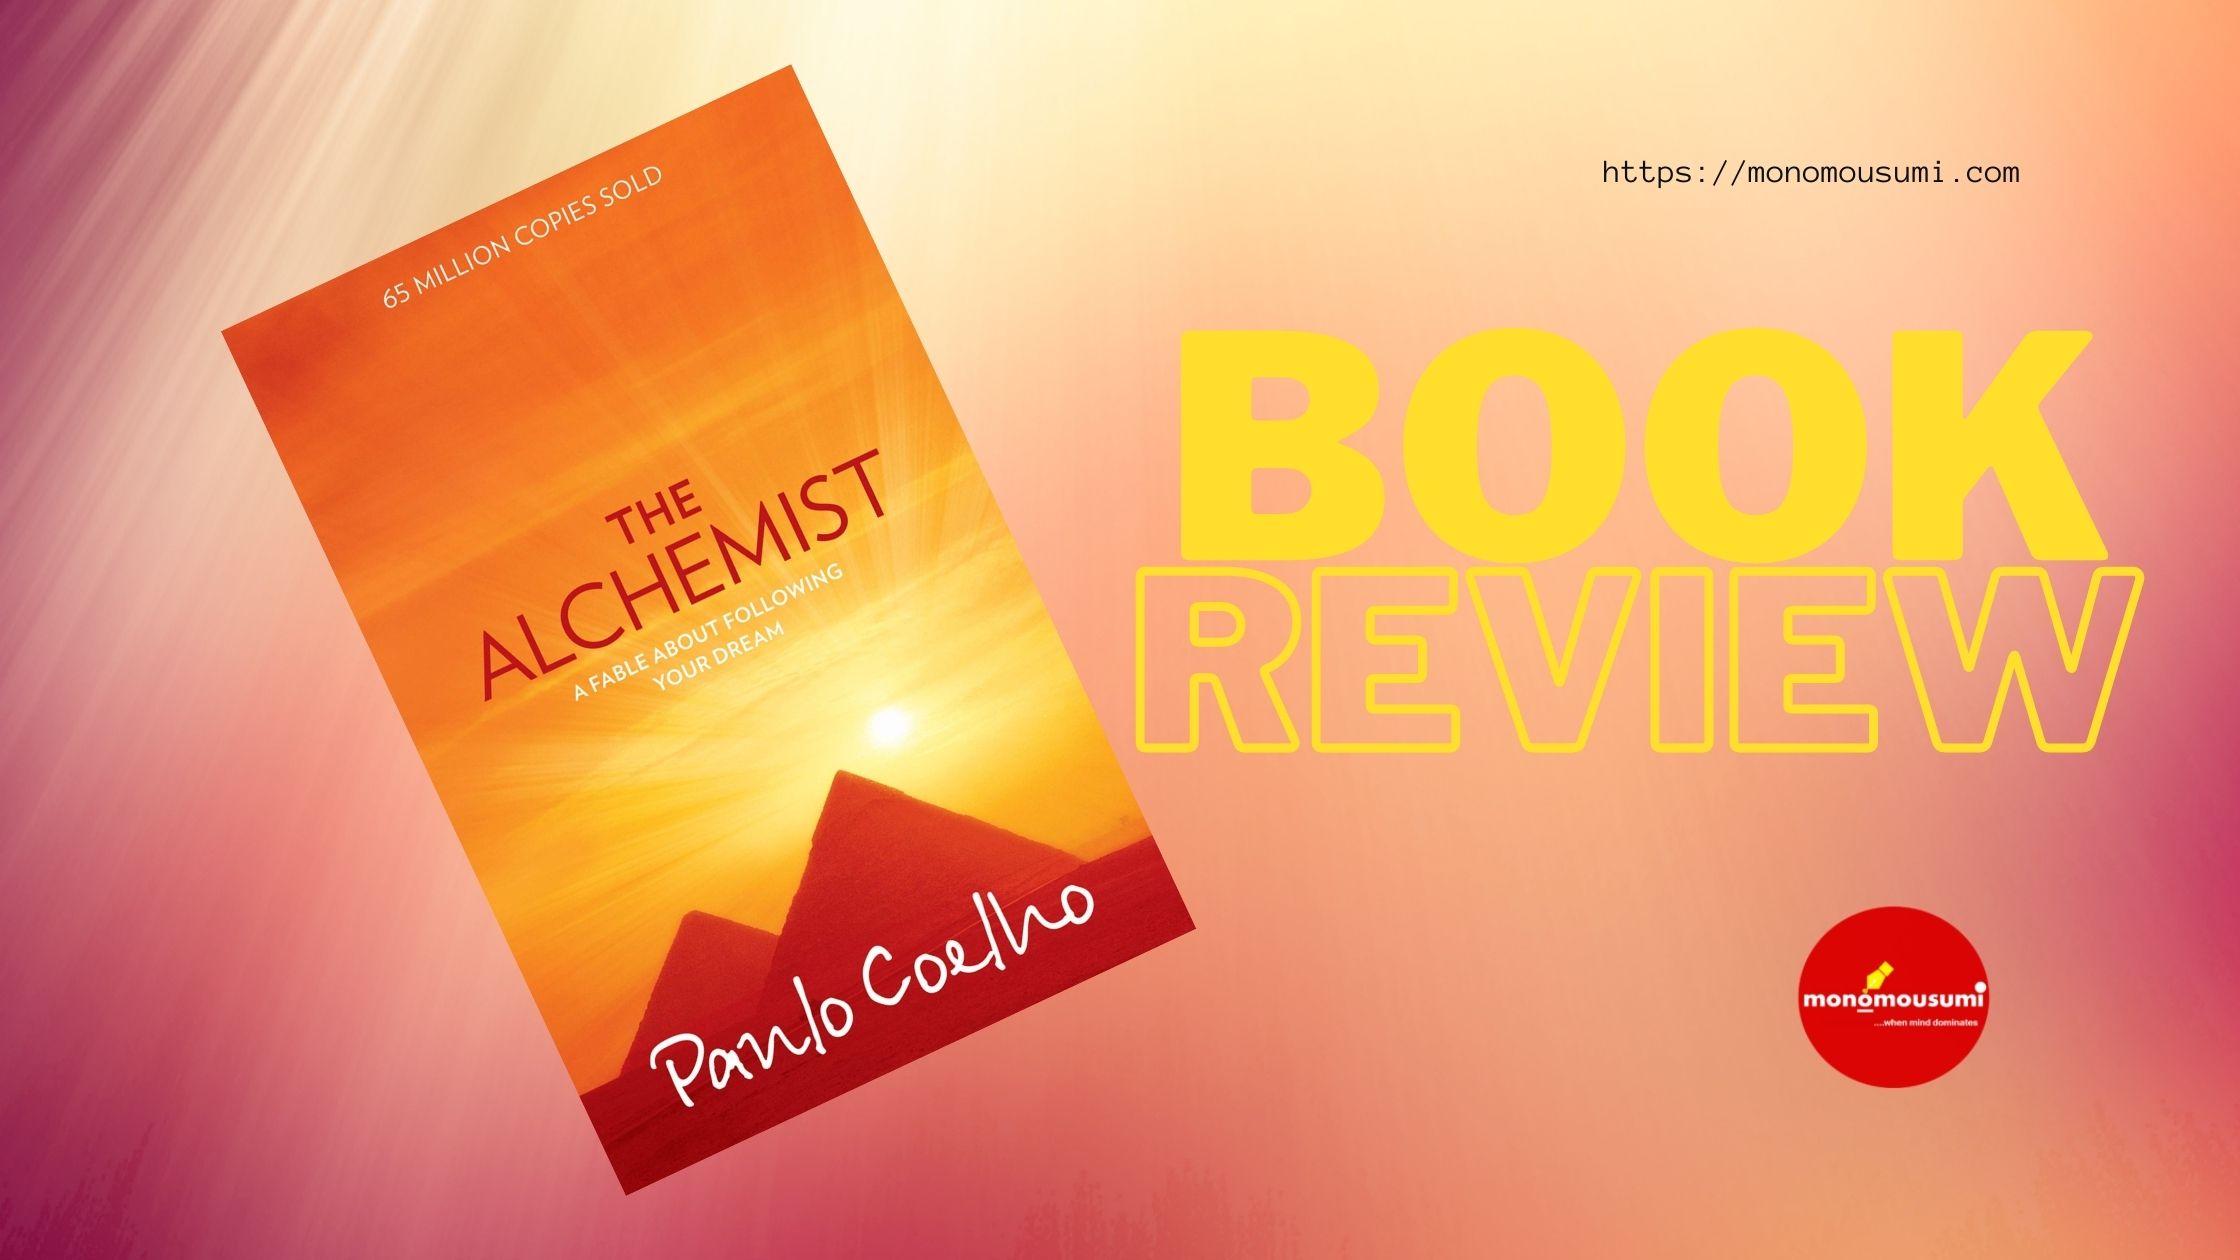 The Alchemist by Paulo Coelho - Book Review - Bombay Reads